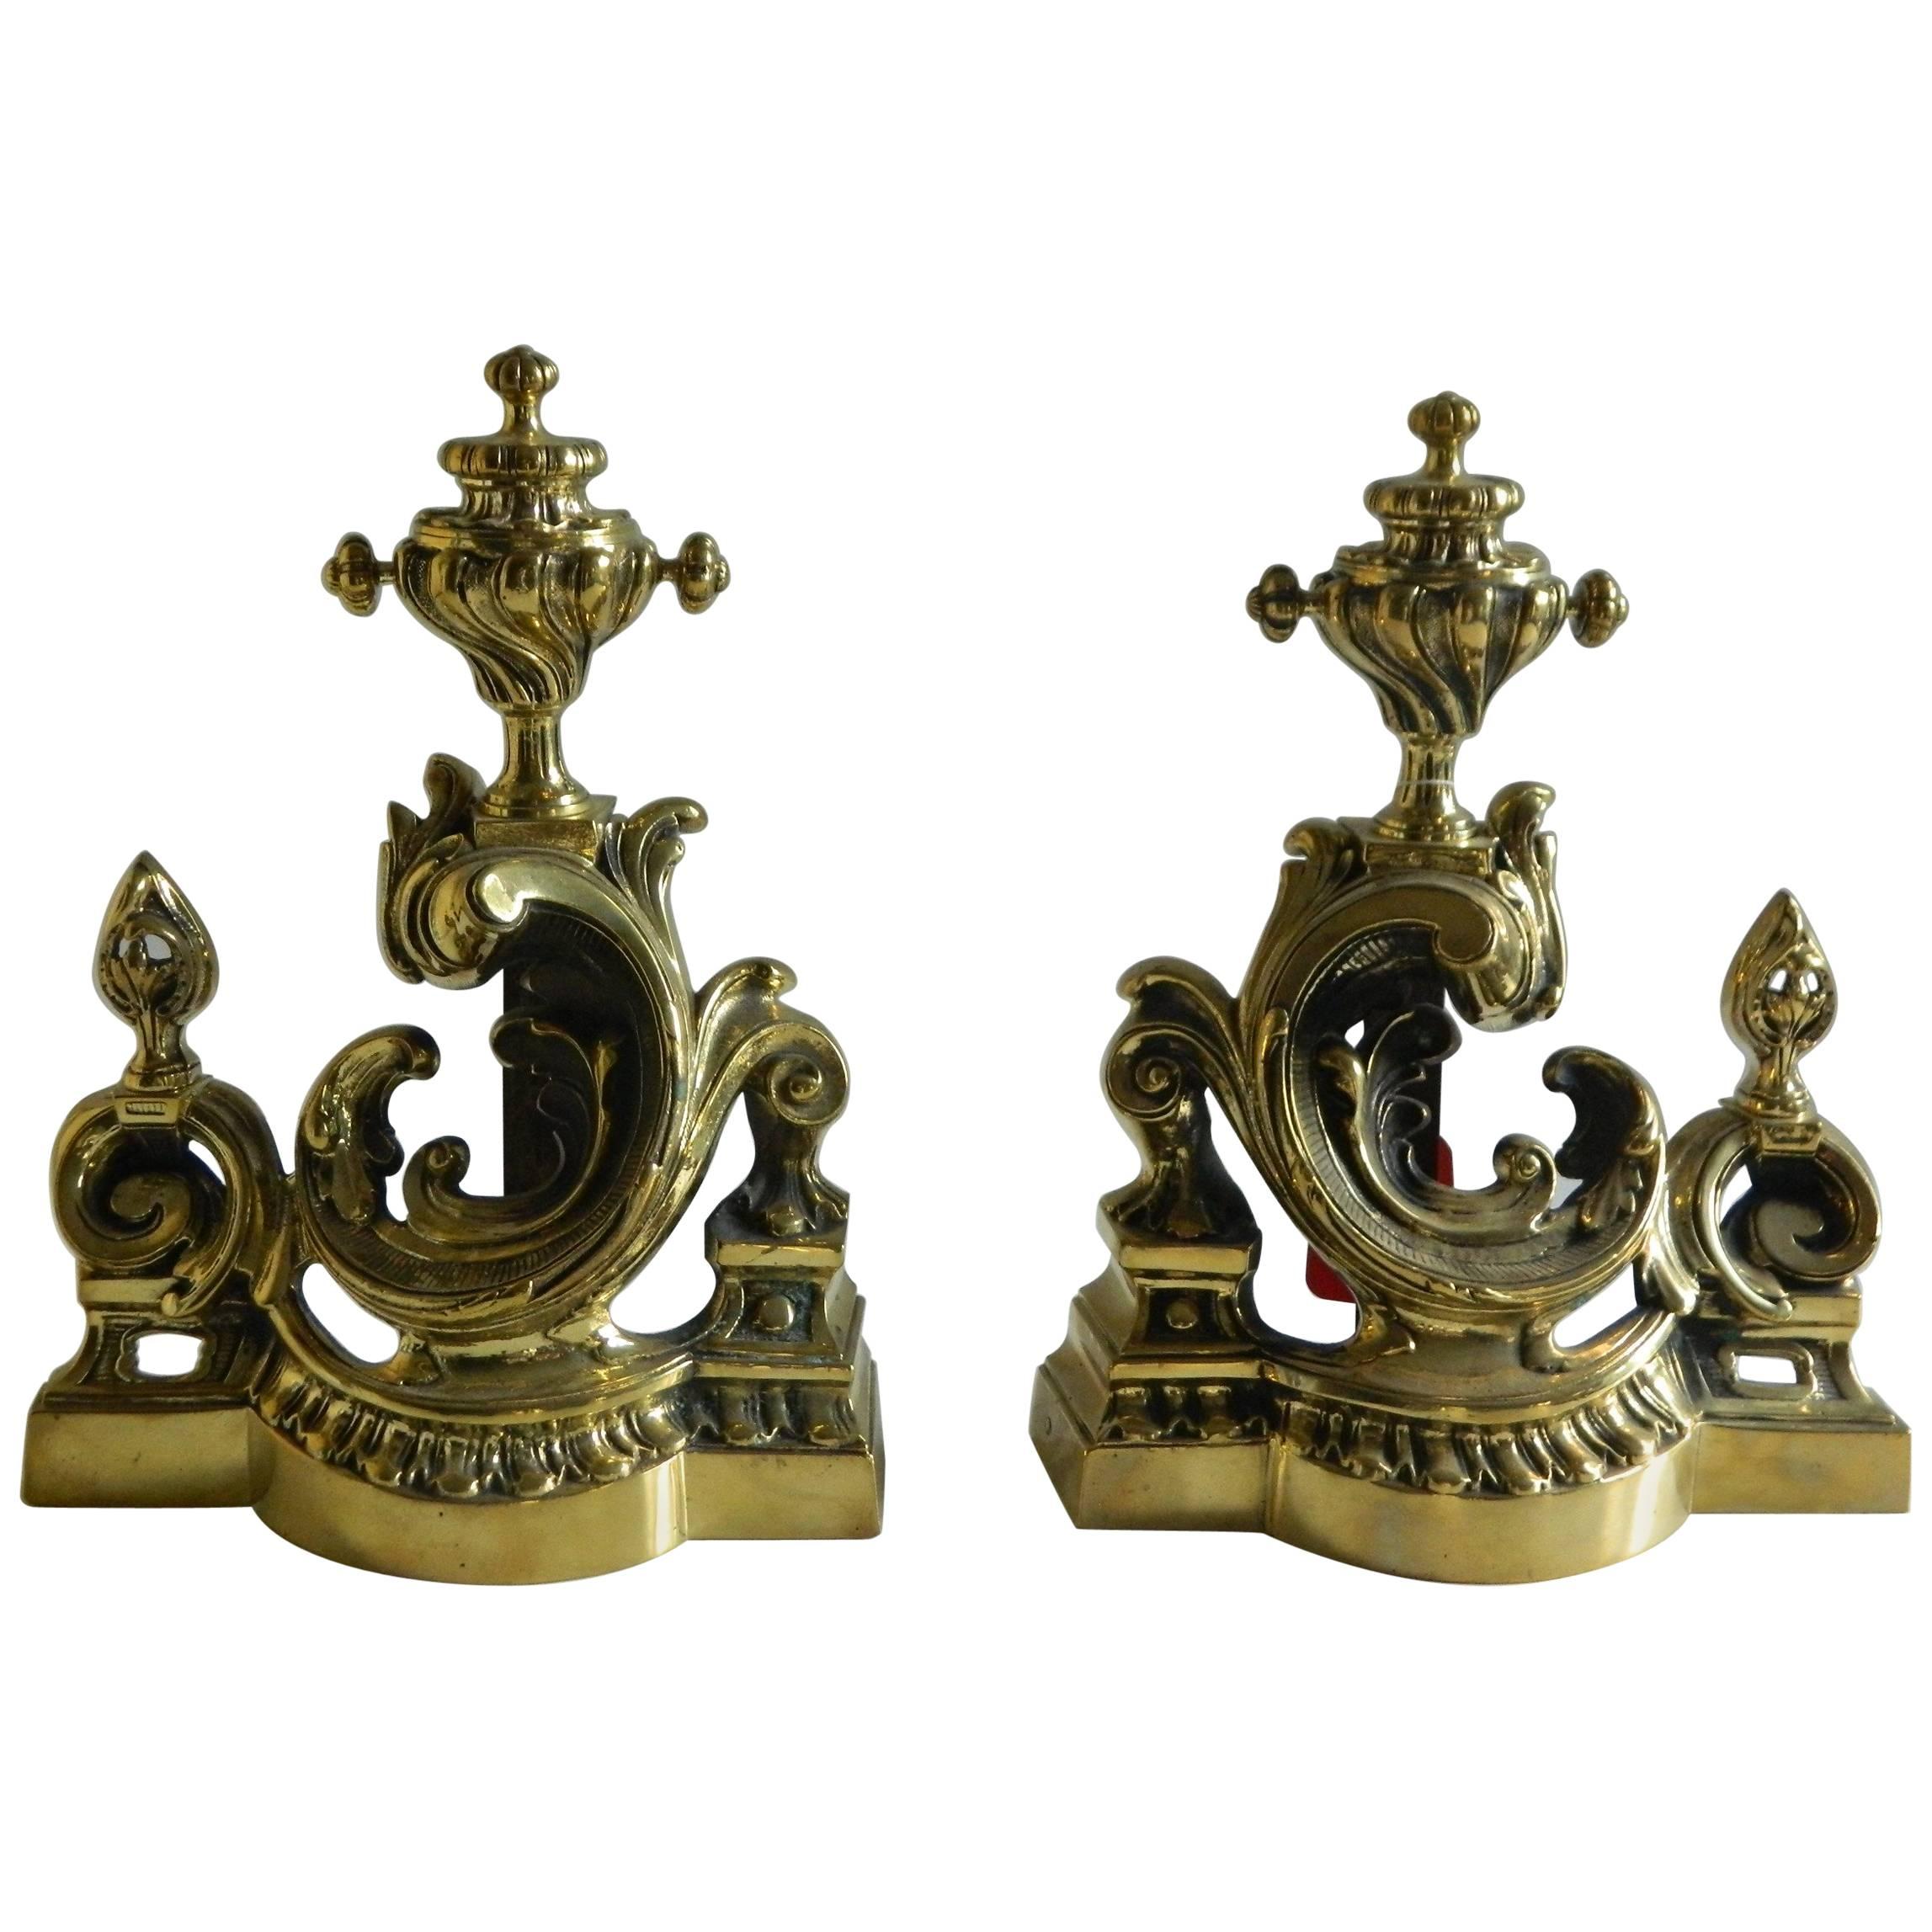 Pair of Polished Brass Chenets or Andirons, Scroll Motif, 19th Century For Sale